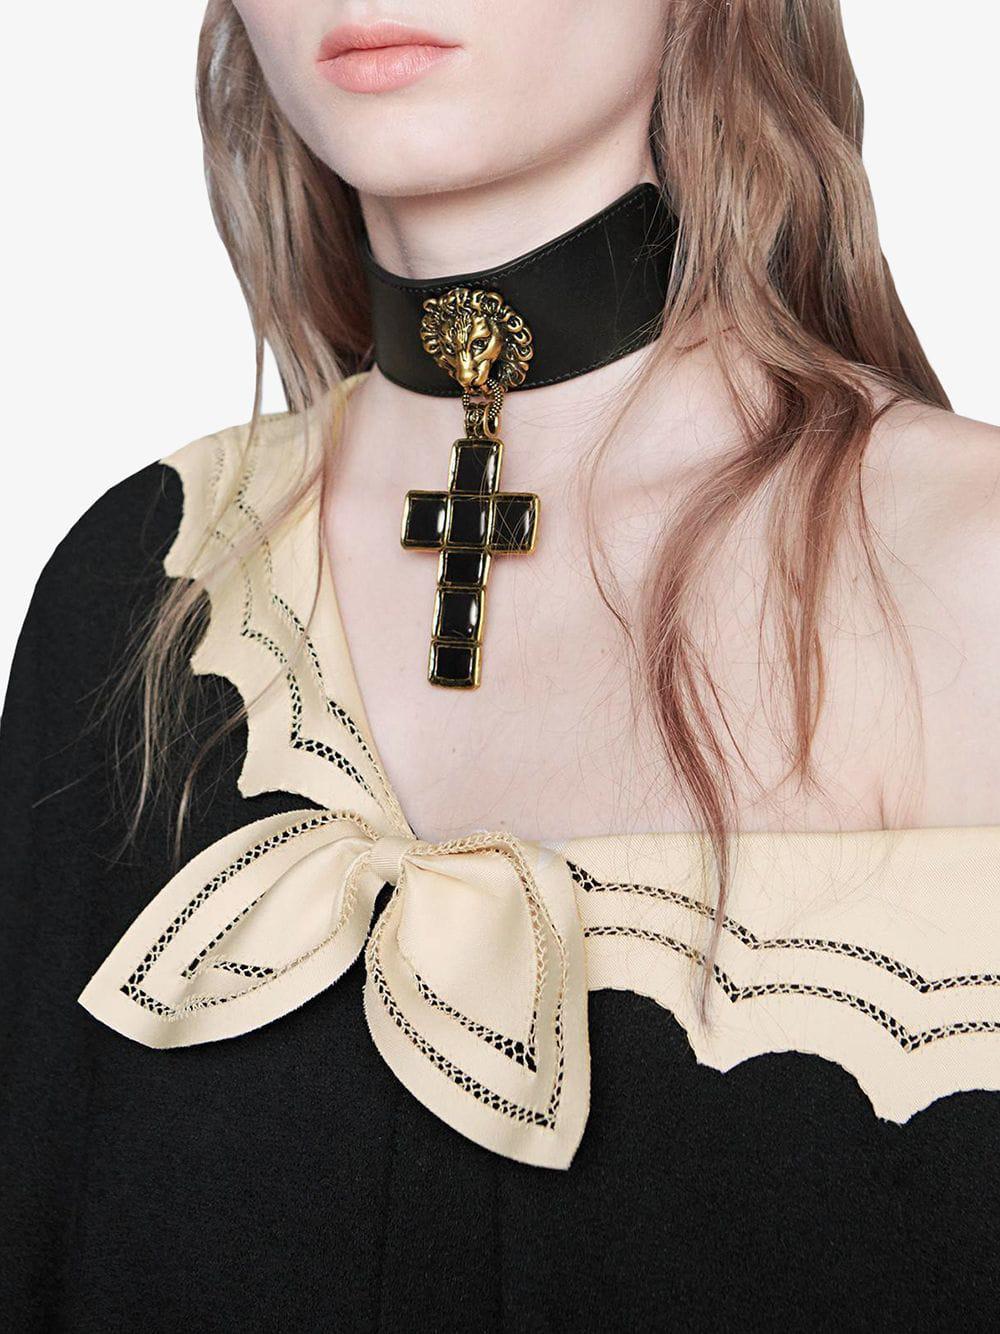 Gucci Leather Choker With Cross Pendant in Black | Lyst